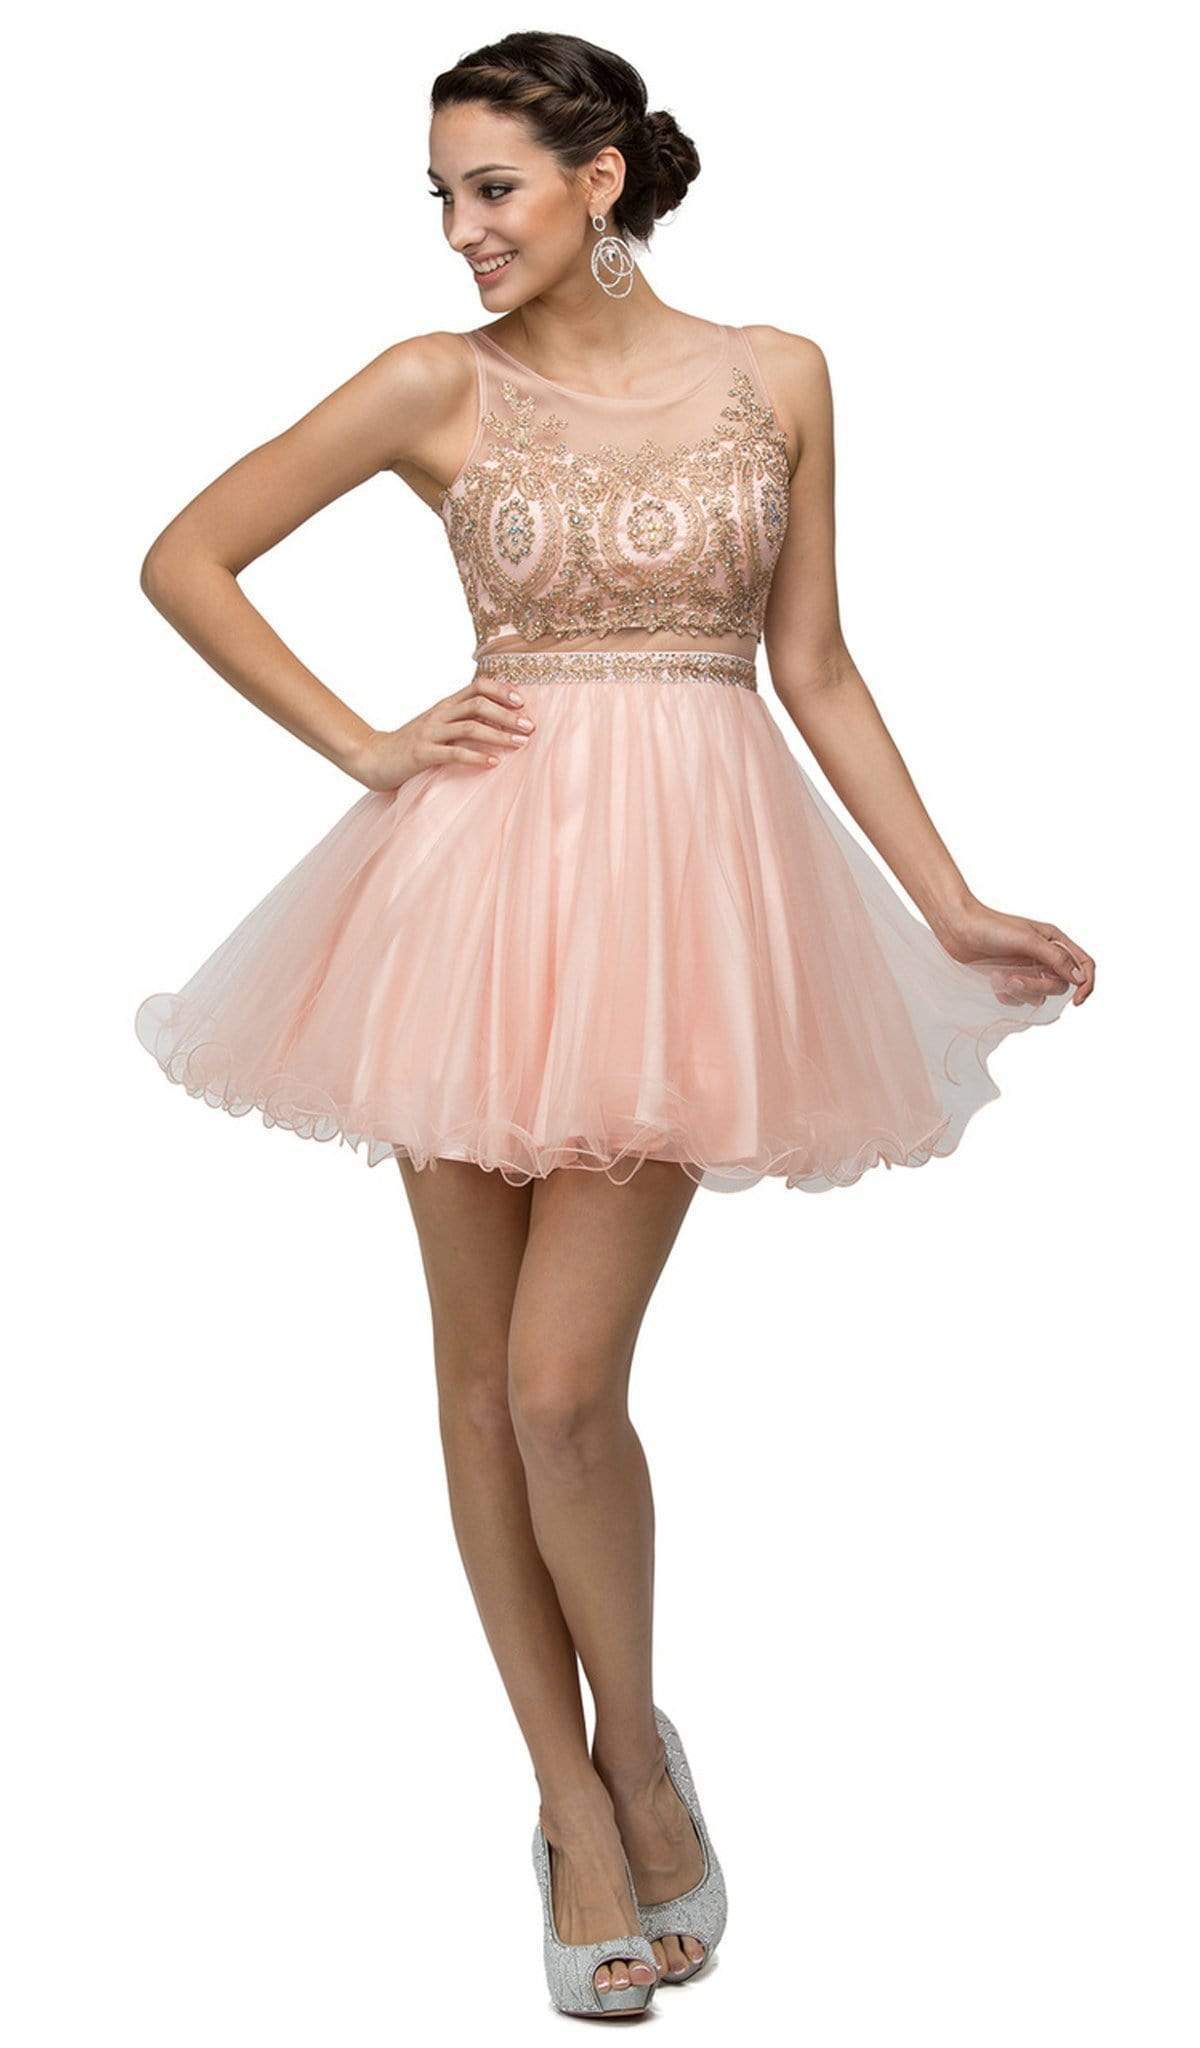 Image of Dancing Queen - 9518 Lace Embellished Illusion A-Line Short Prom Dress